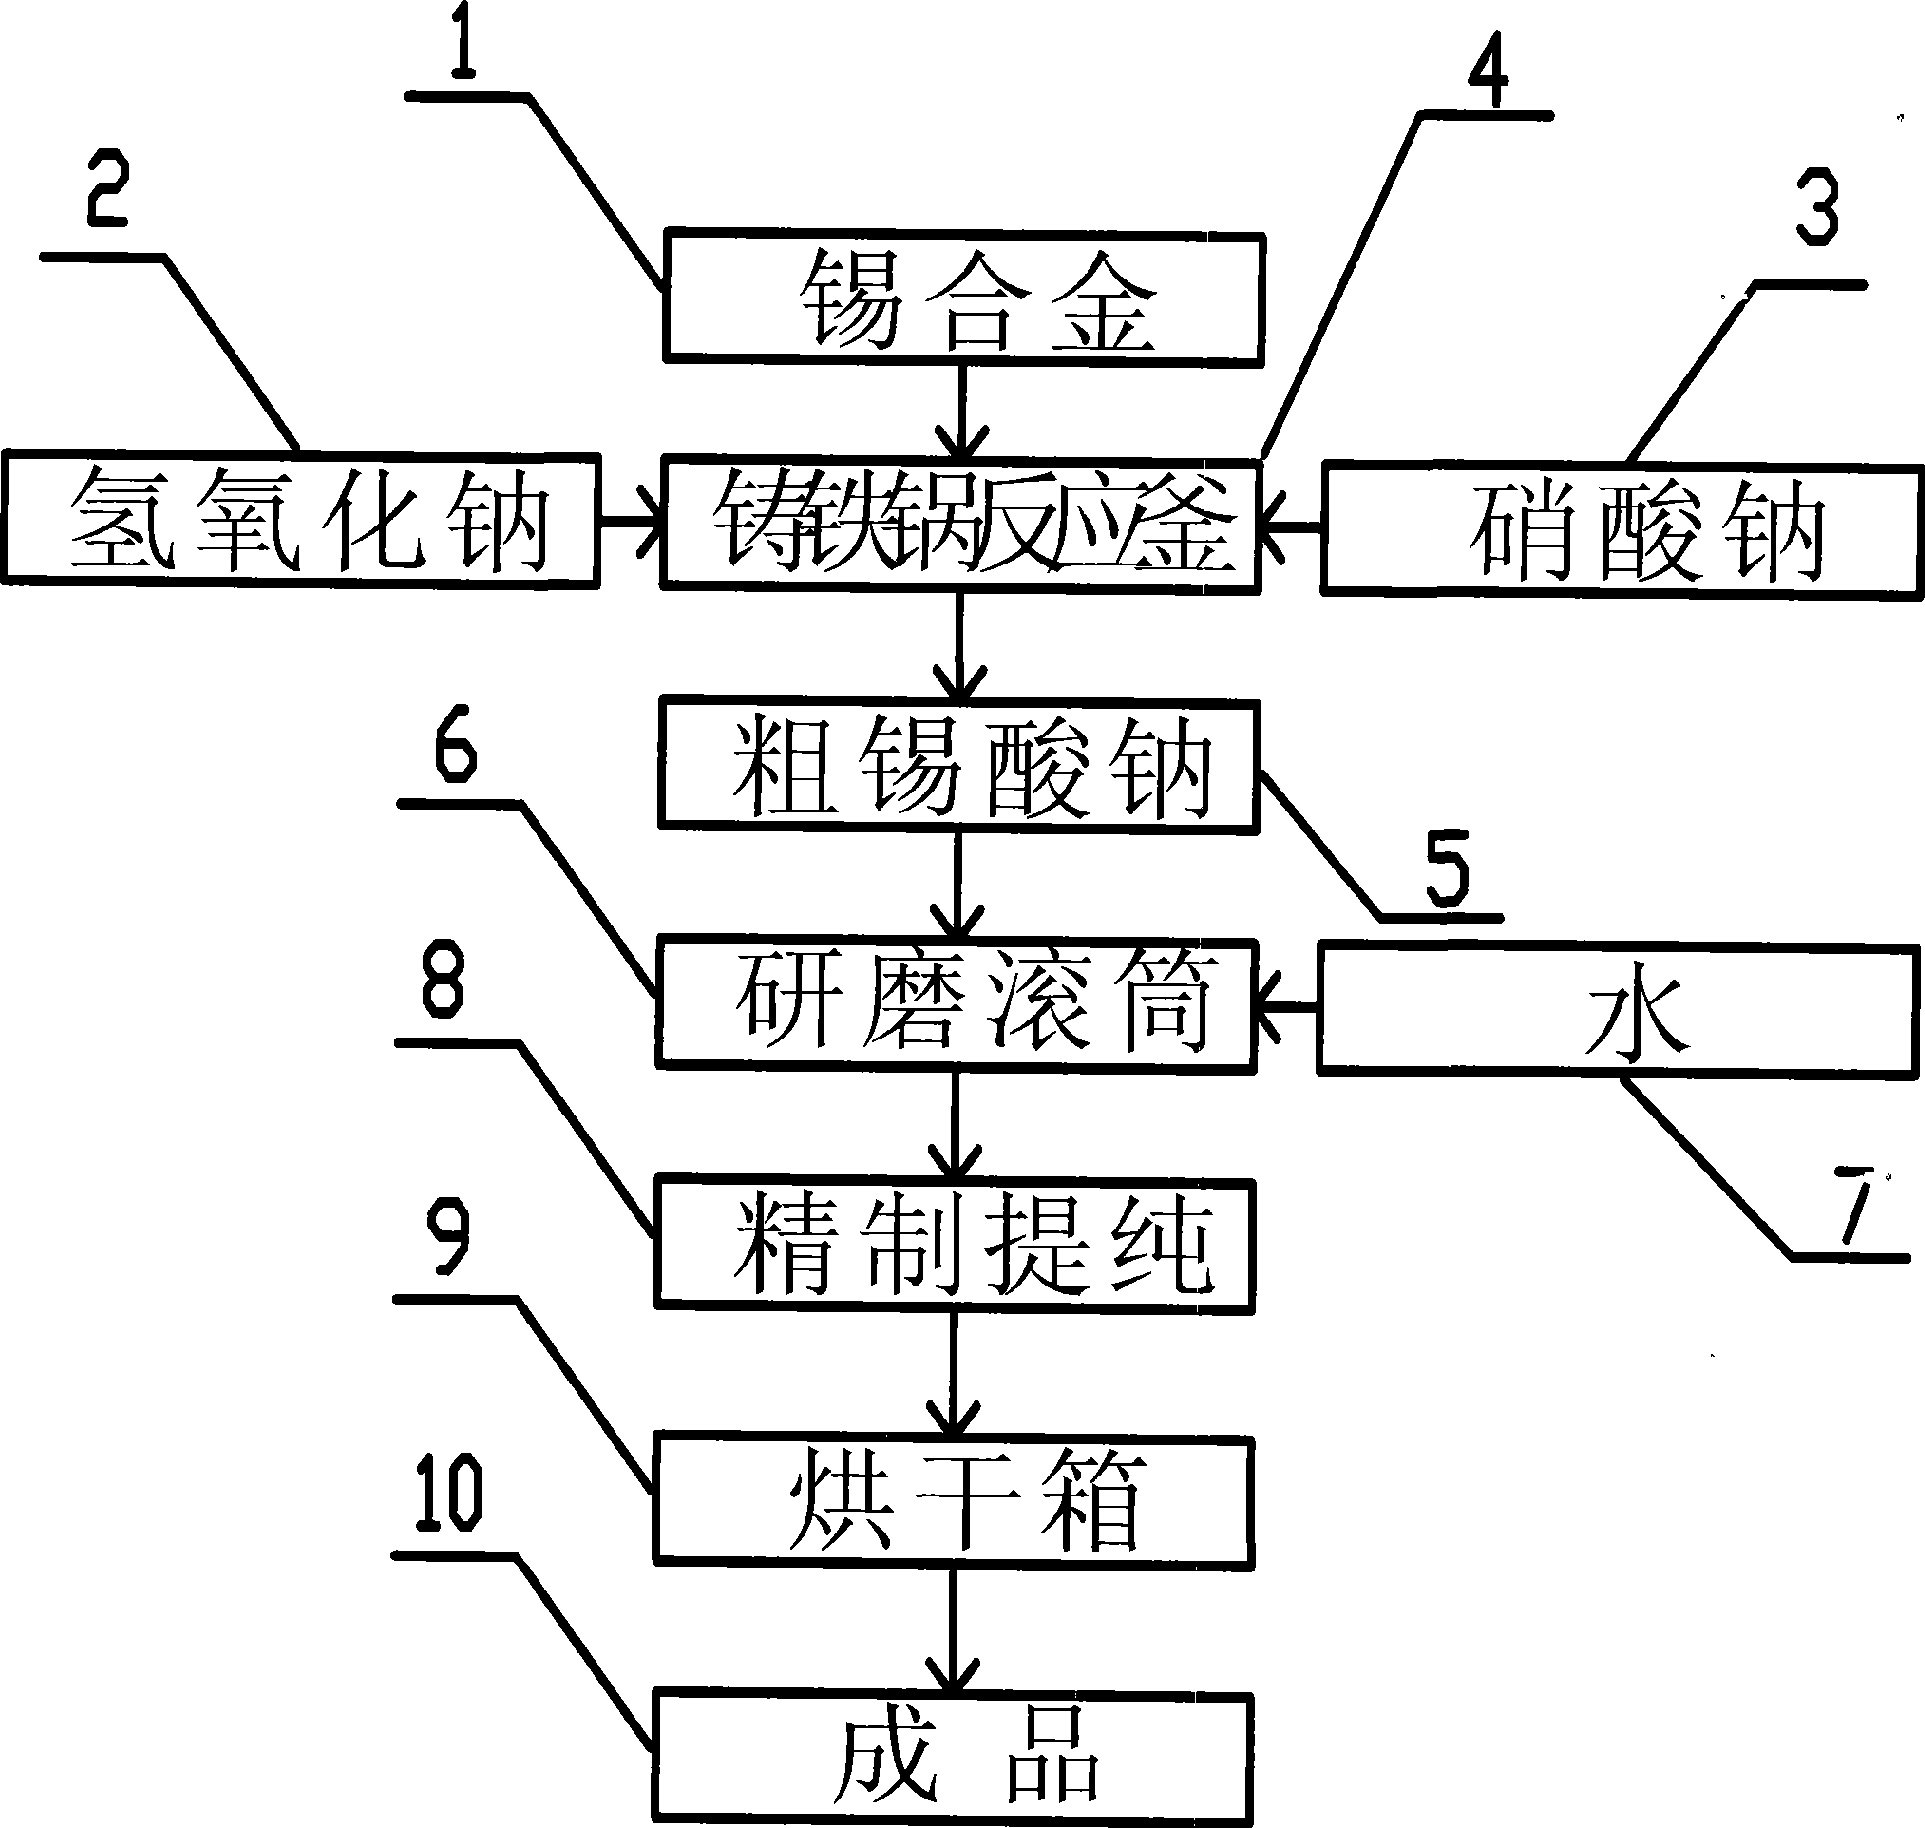 Method for producing sodium stannate by using tin and tin alloy